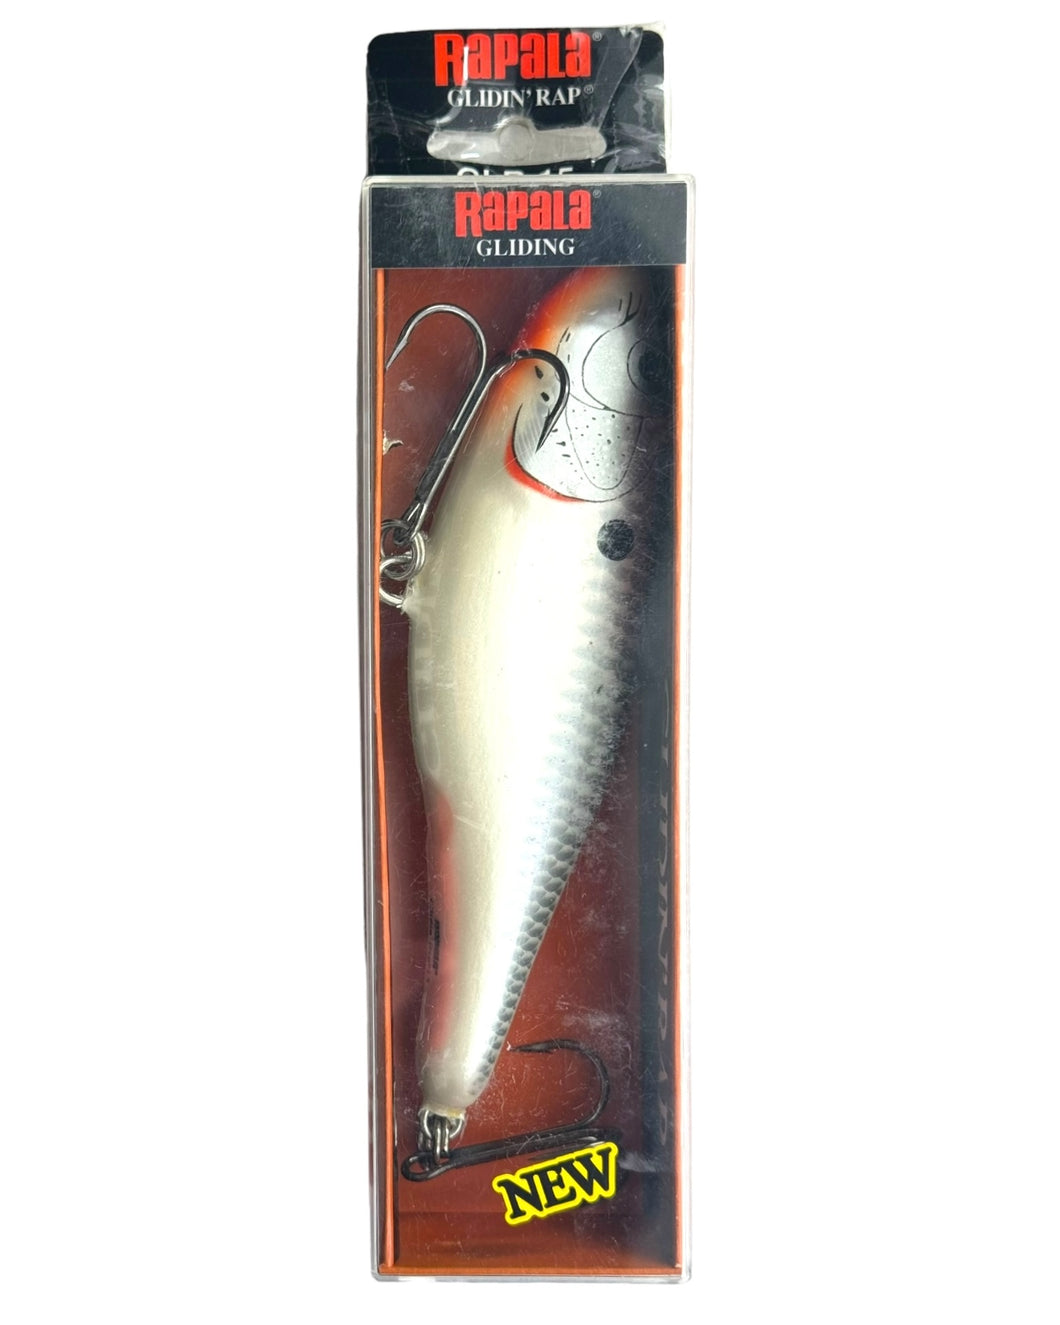 RAPALA LURES GLR-15 GLIDIN' RAP Fishing Lure in PEARL SHAD